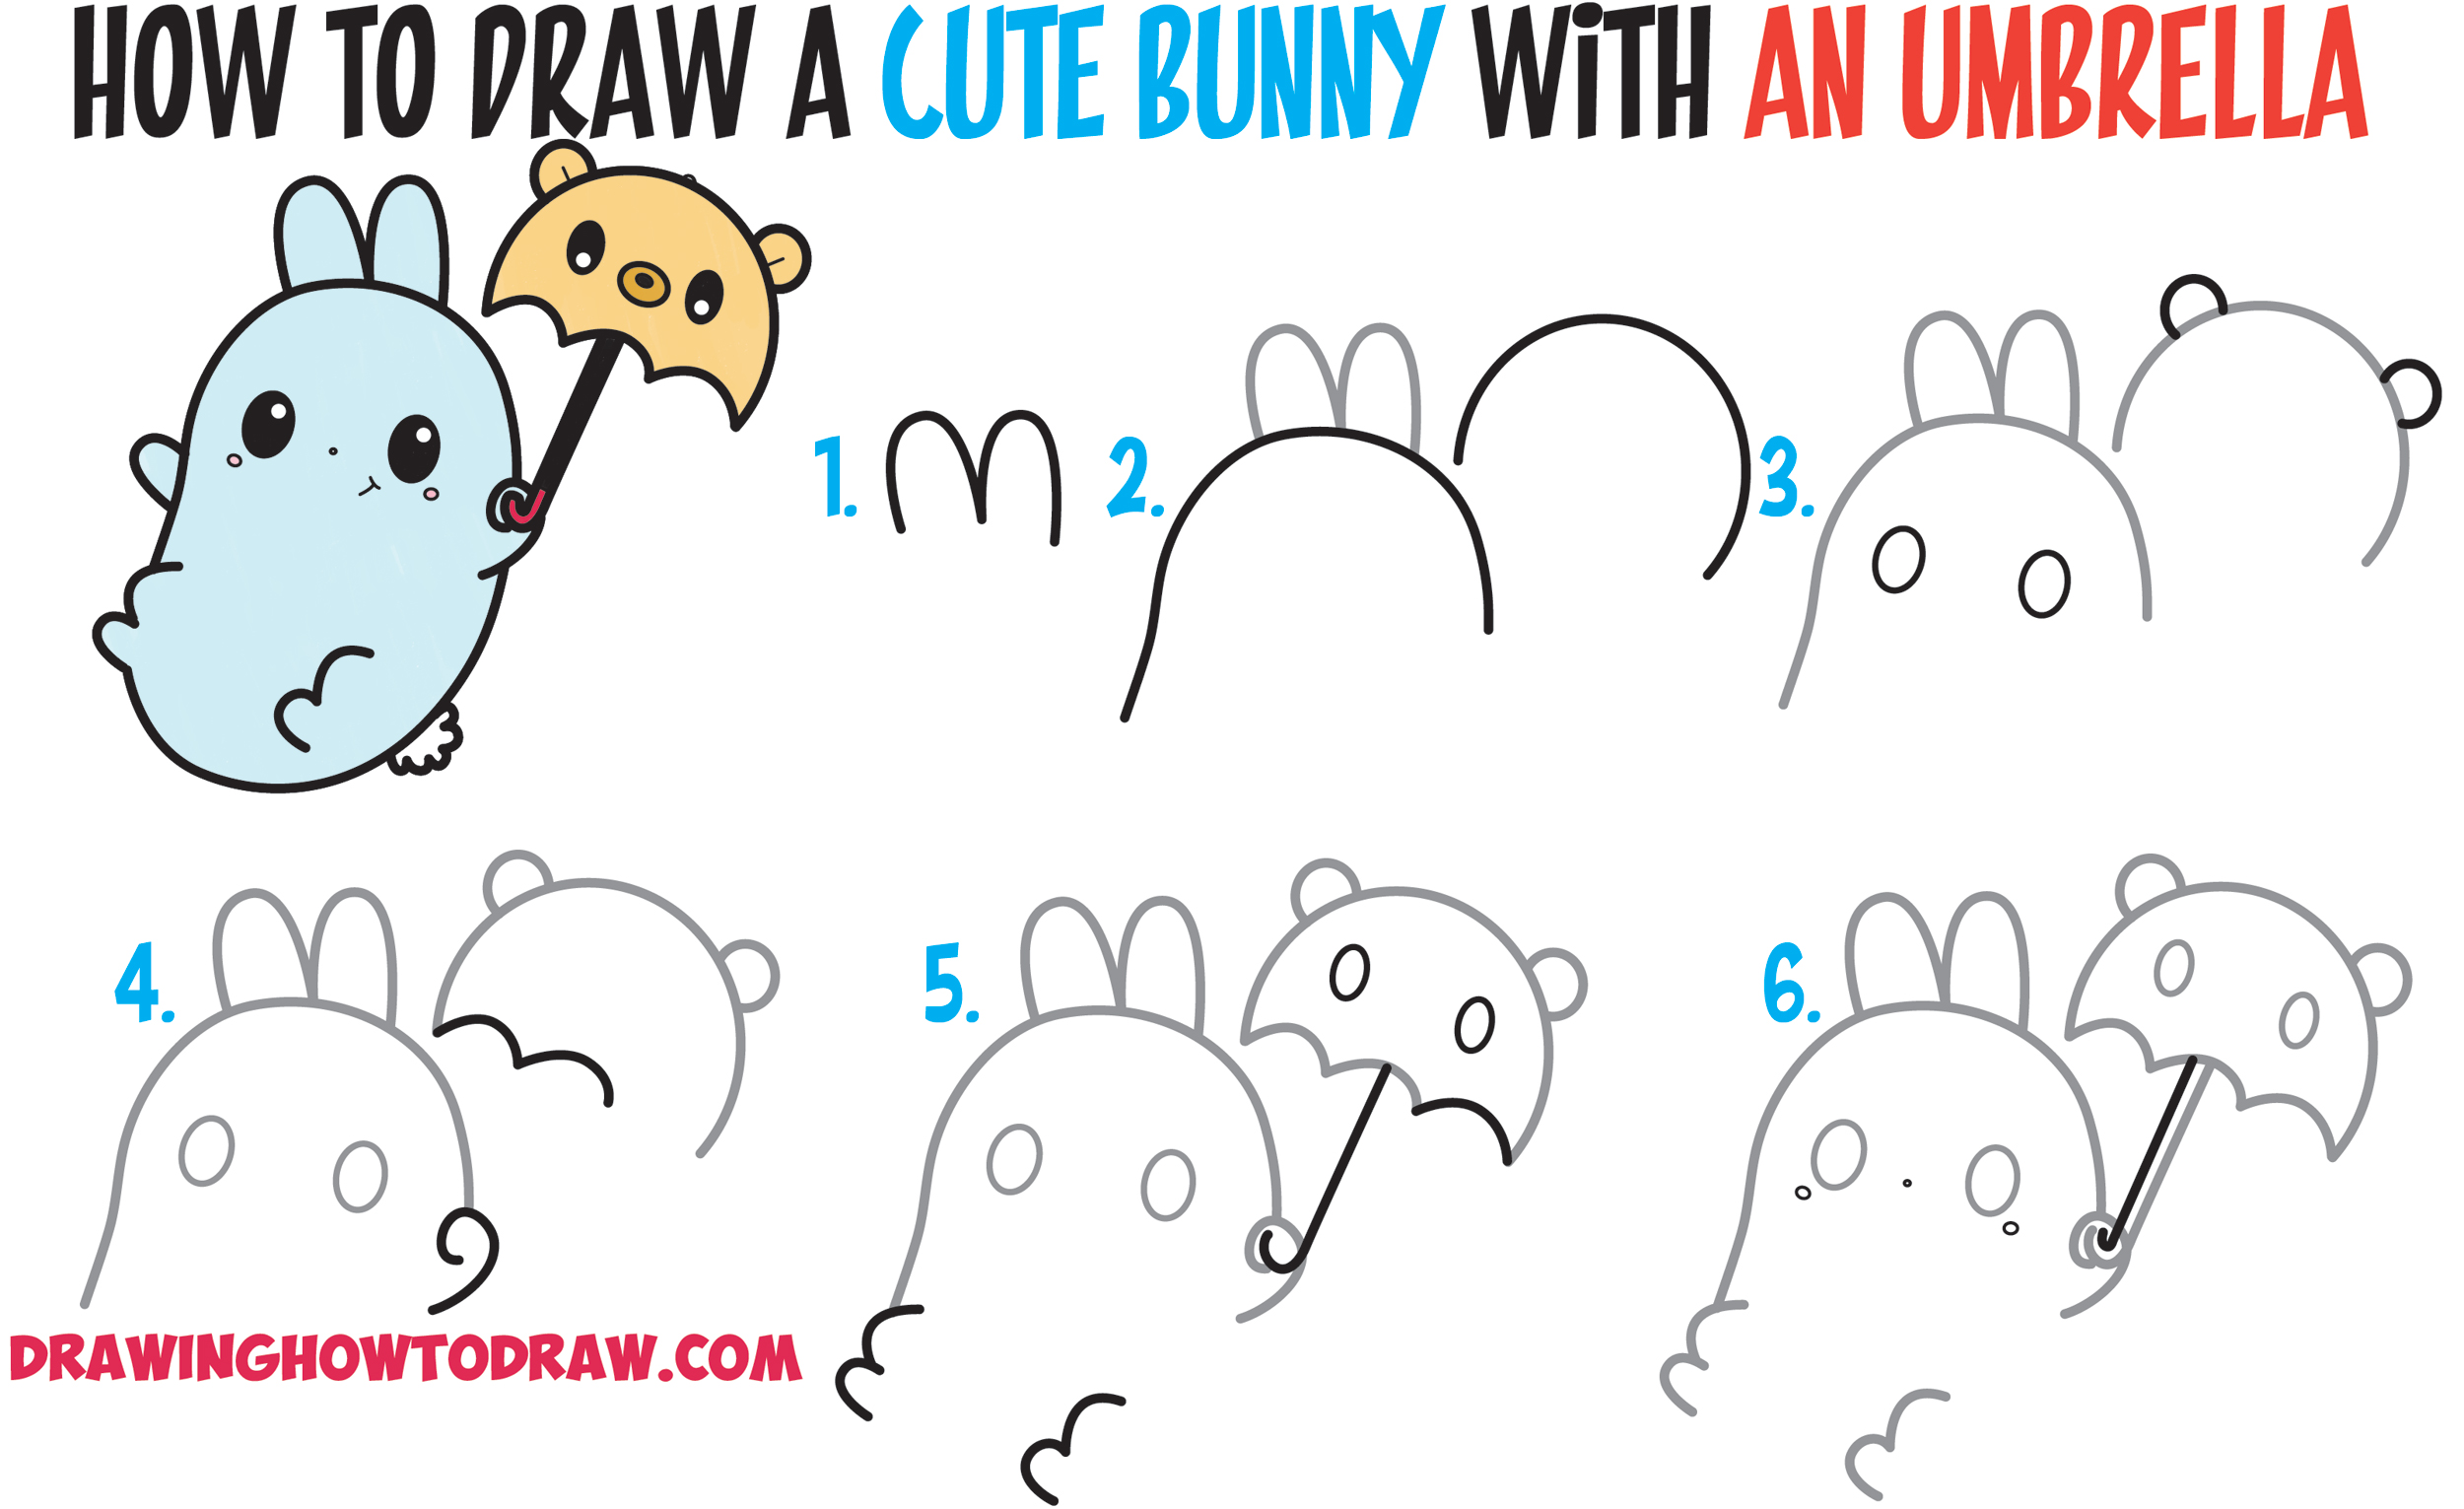 Learn How to Draw a Cute Kawaii Bunny Rabbit Holding a Bear Umbrella Easy Step by Step Drawing Tutorial for Kids and Beginners